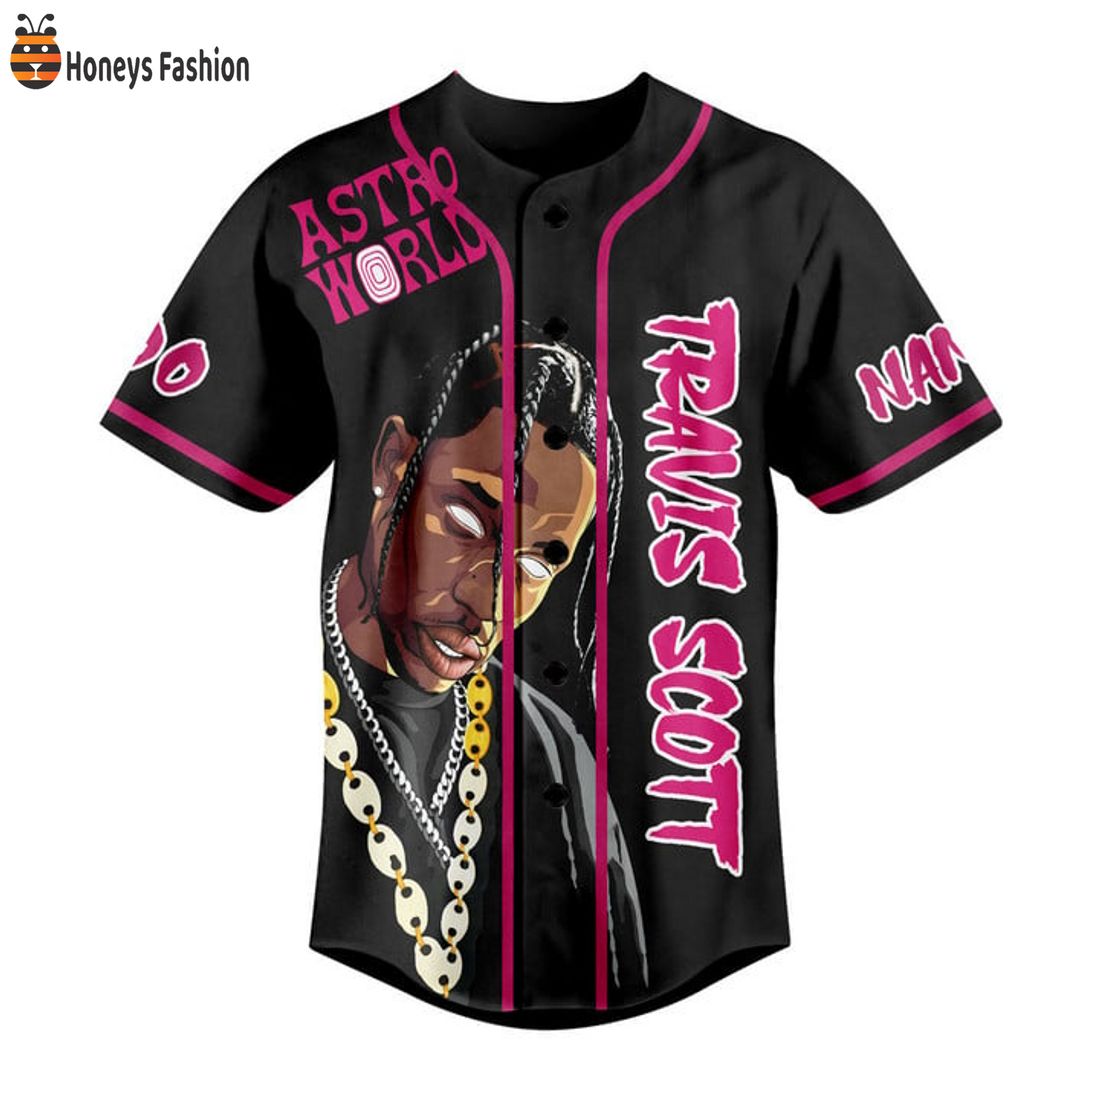 SELLER Travis Scott It’s Lit Life A Bitch Personalized Name Number Baseball Jersey